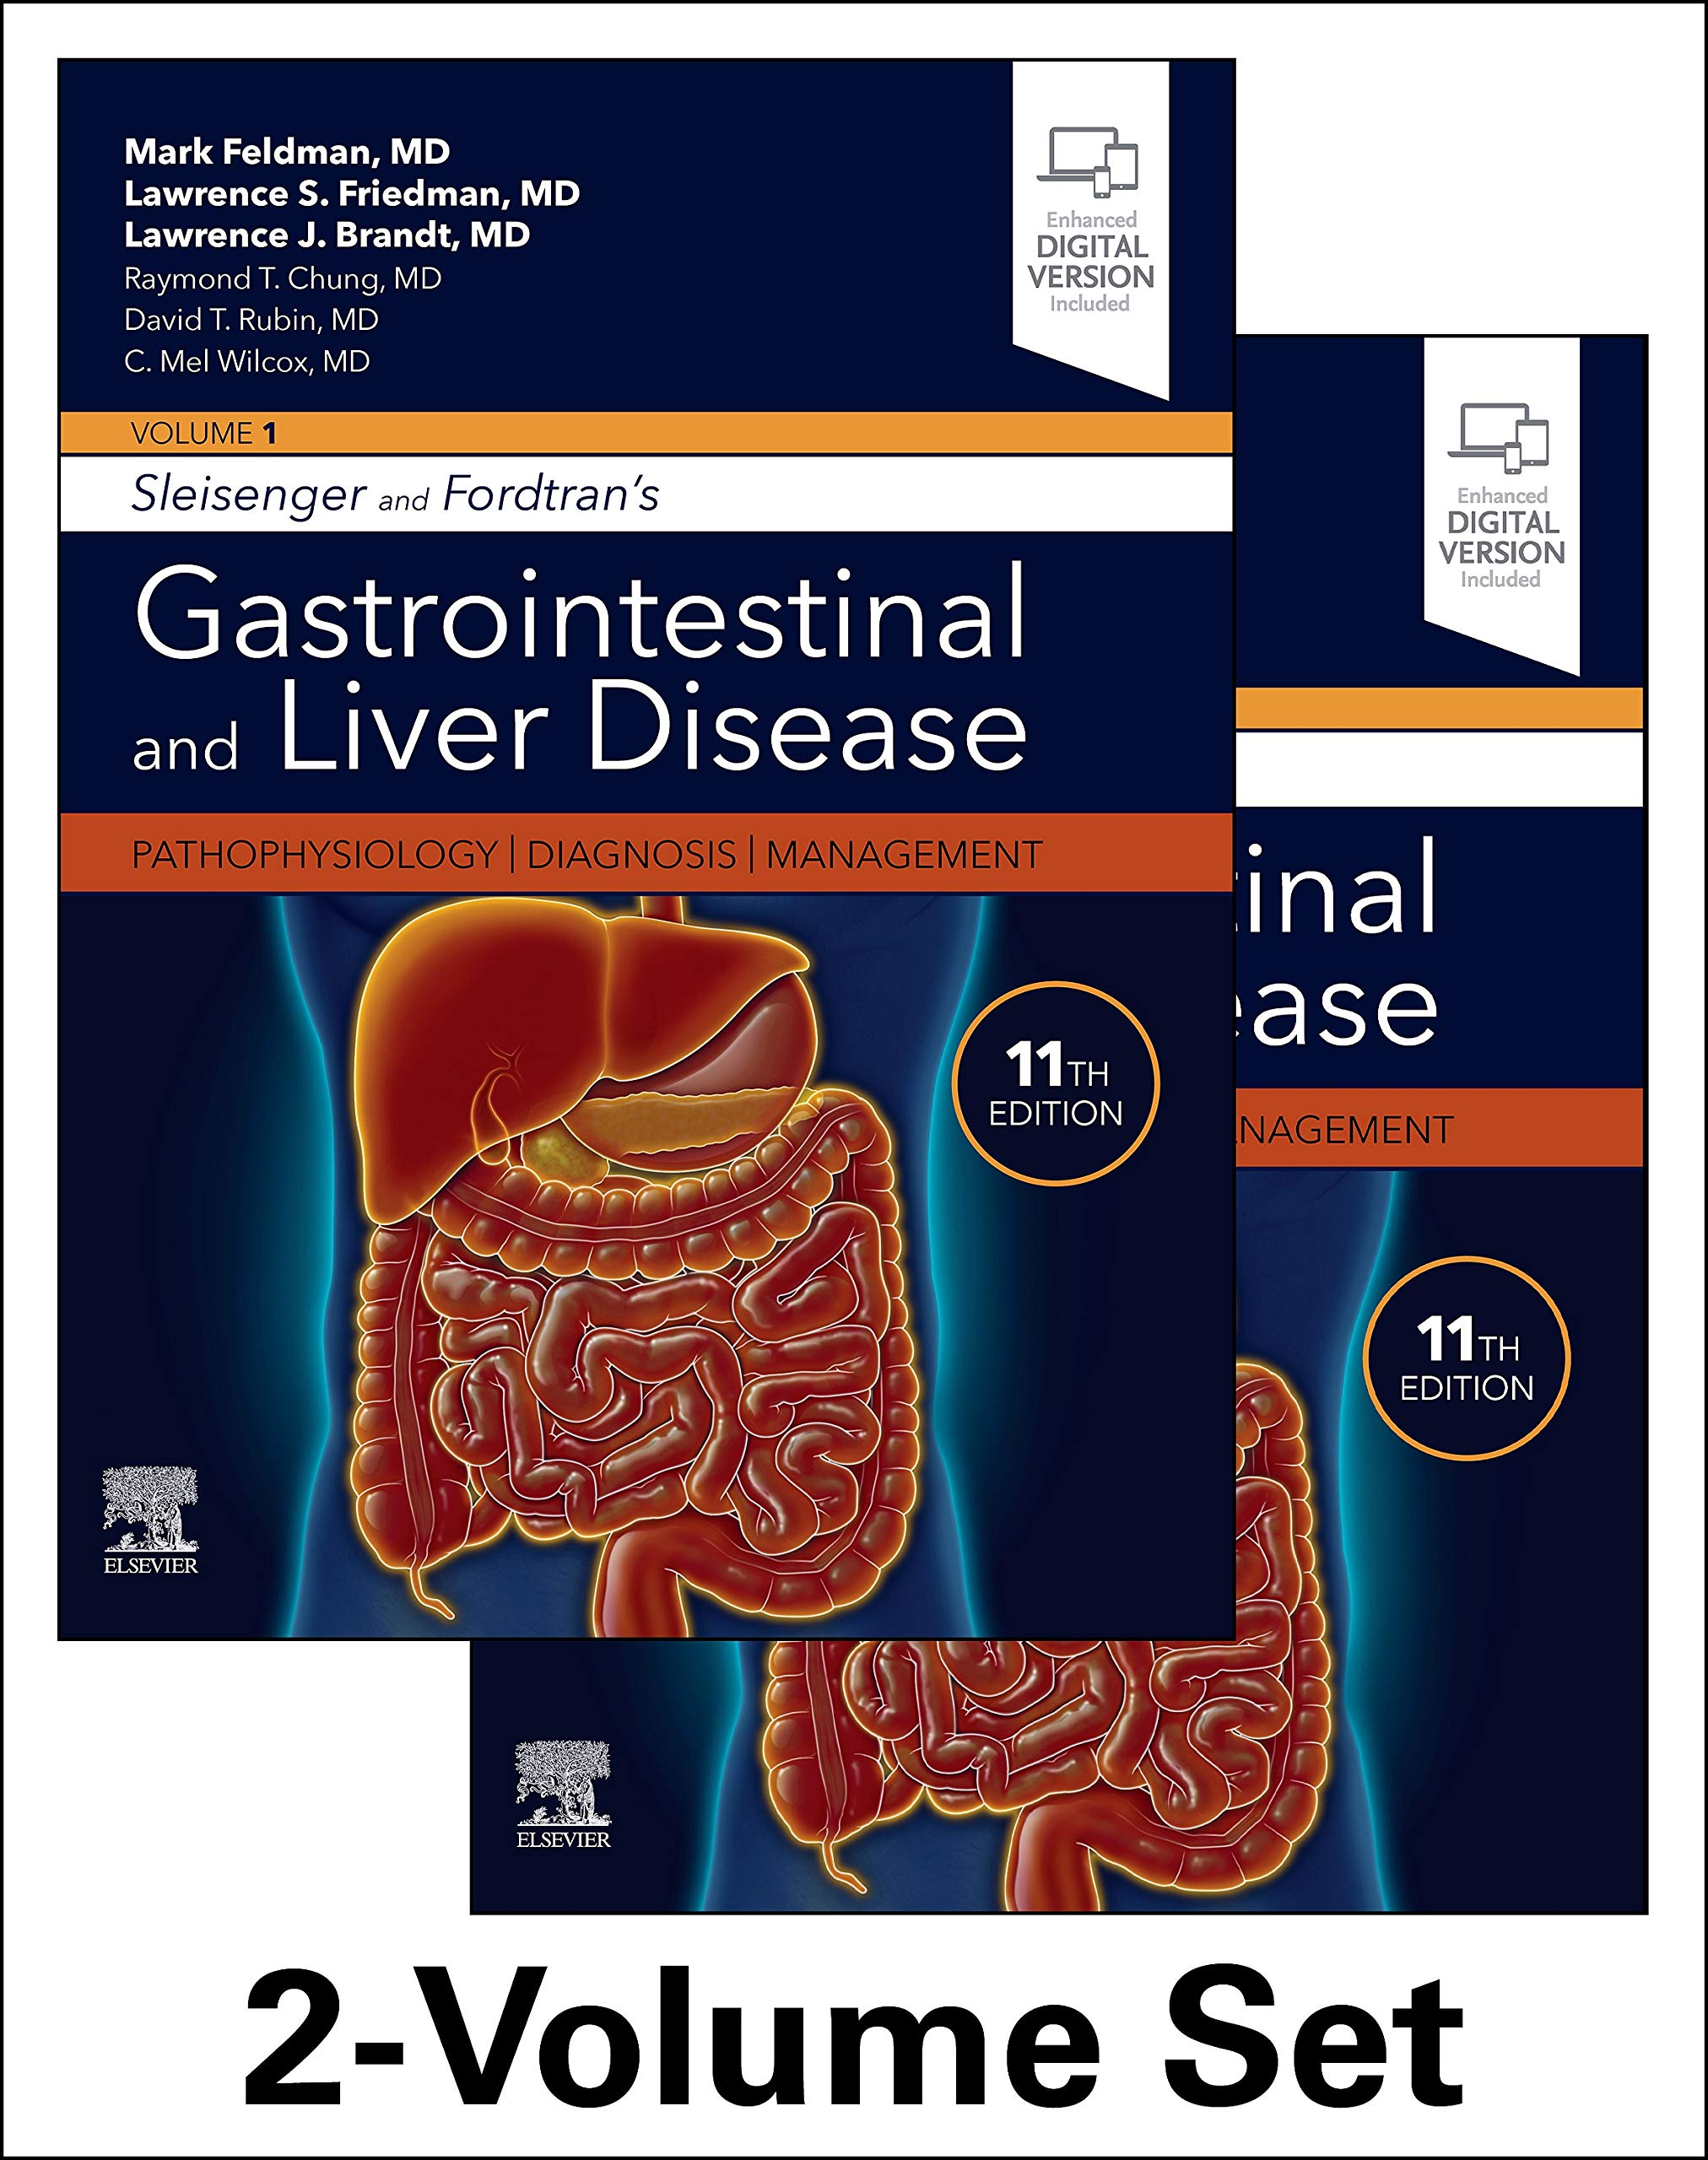 Sleisenger and Fordtran’s gastrointestinal and liver disease